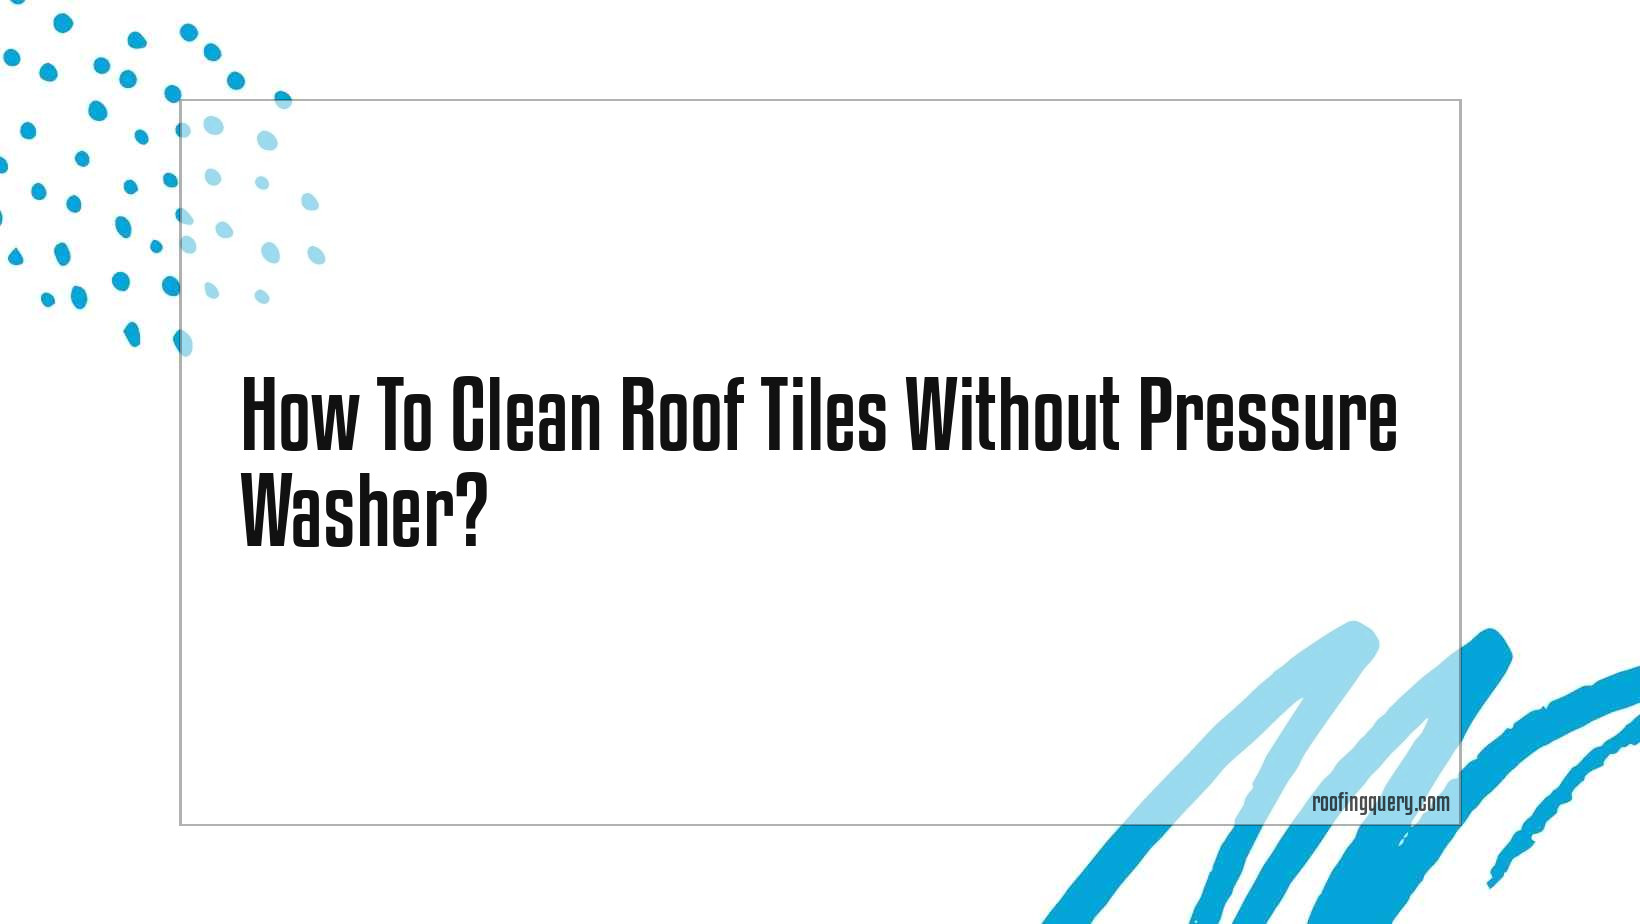 How To Clean Roof Tiles Without Pressure Washer?